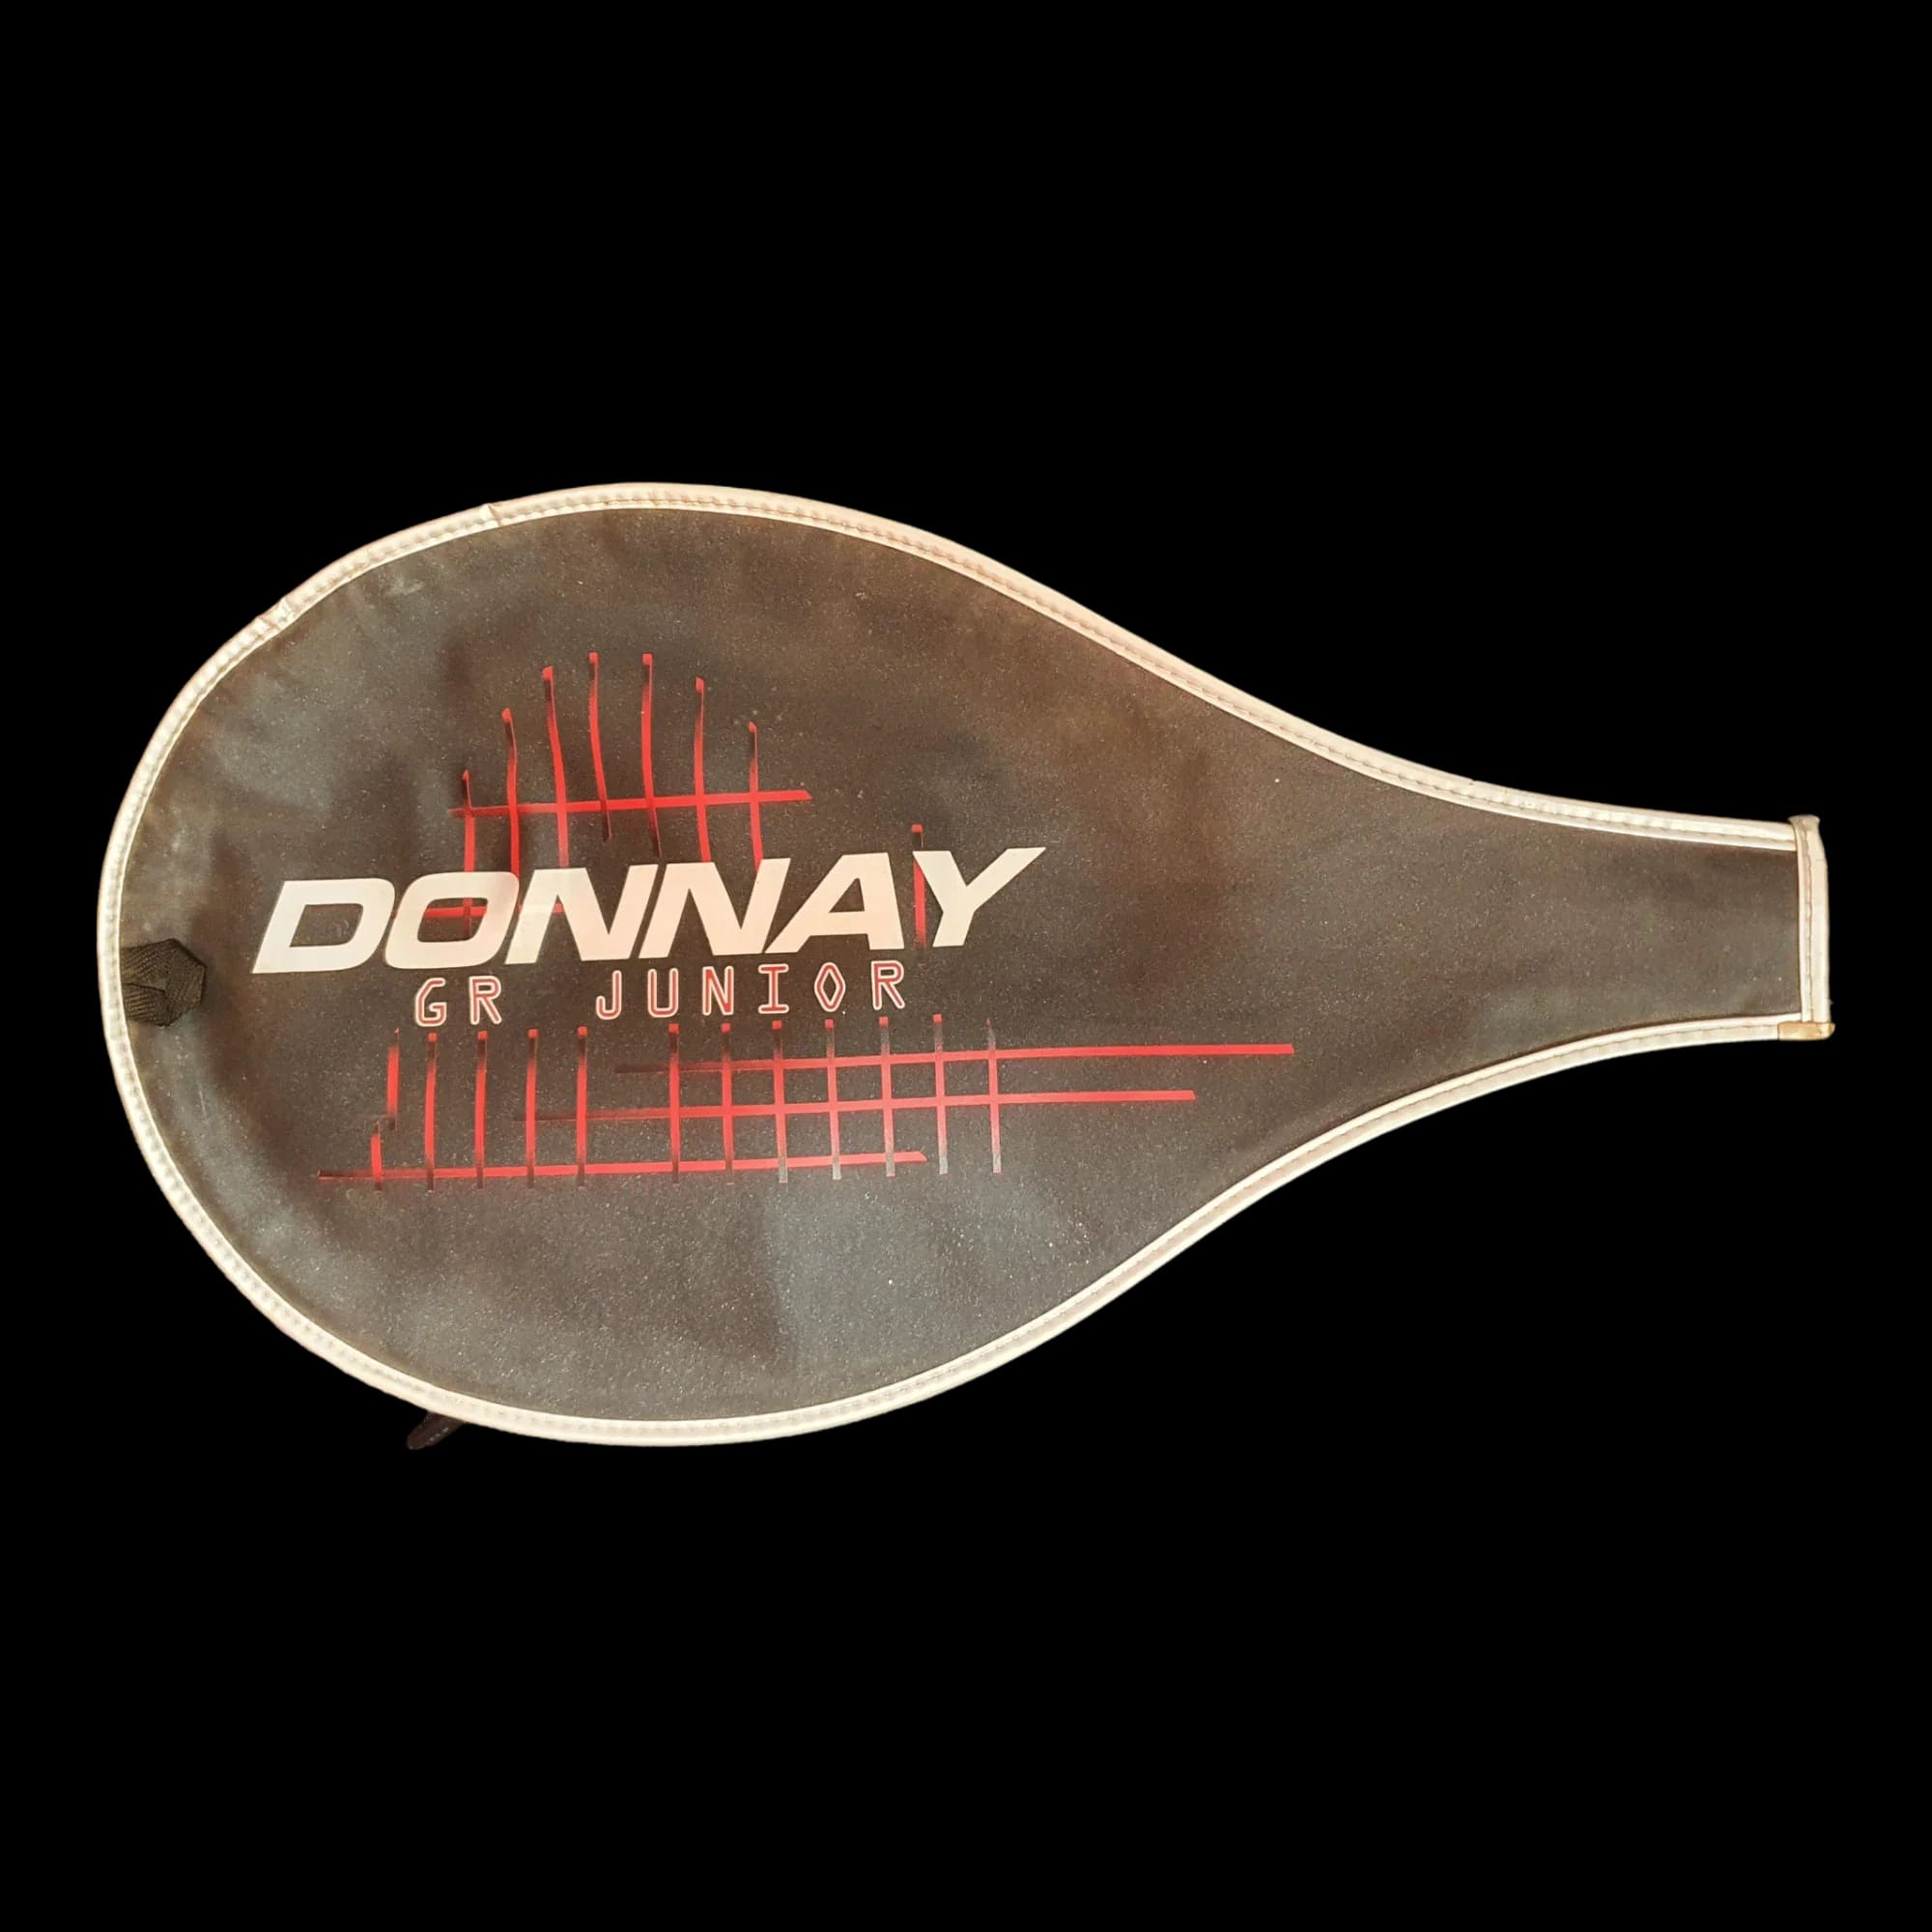 Donnay Gr Junior Tennis Racket With Cover - Rackets - 11